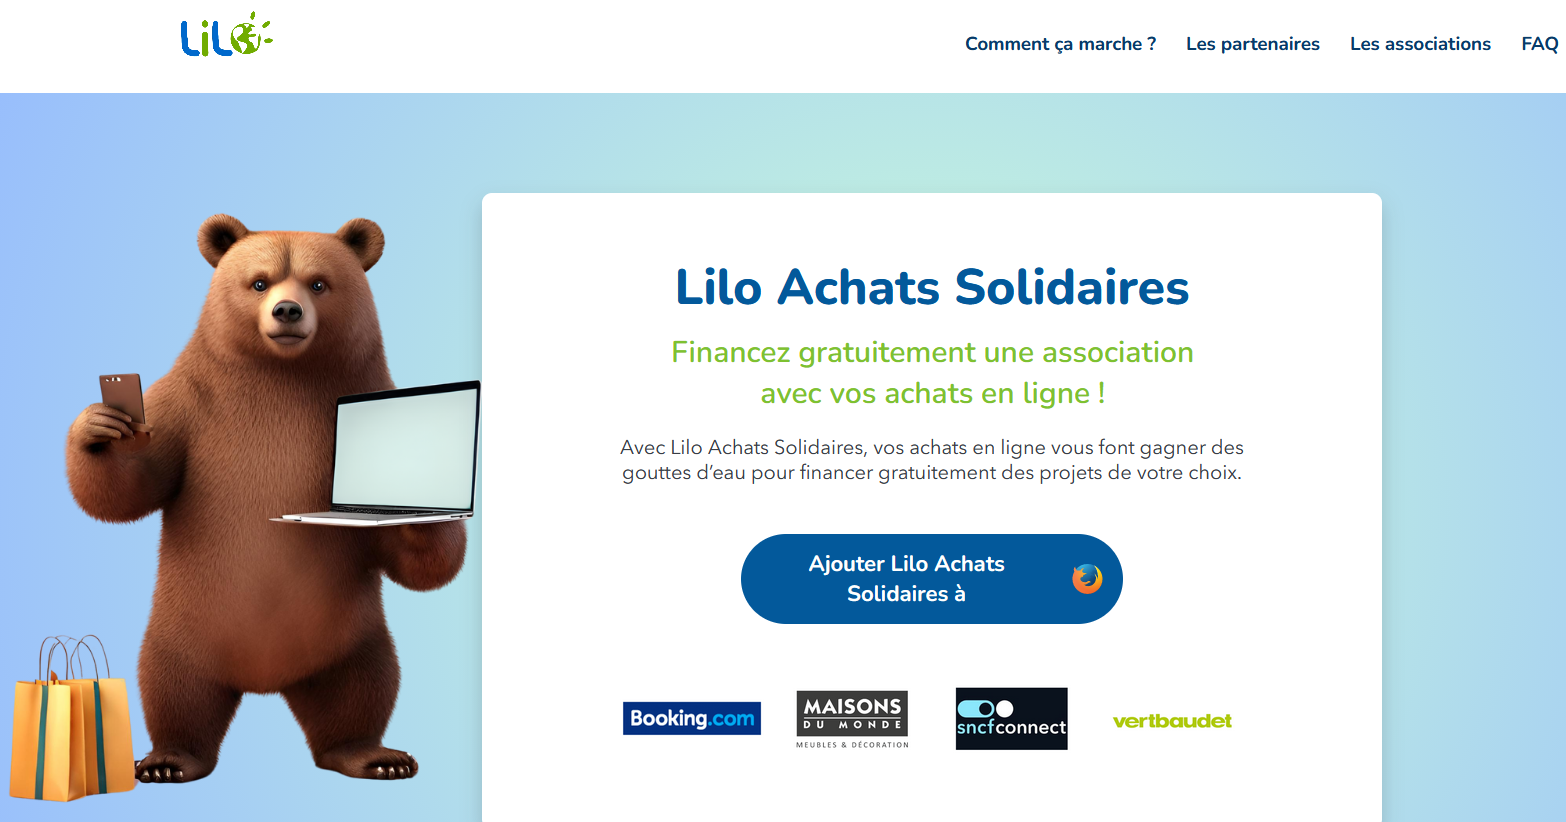 Lilo Achats Solidaires